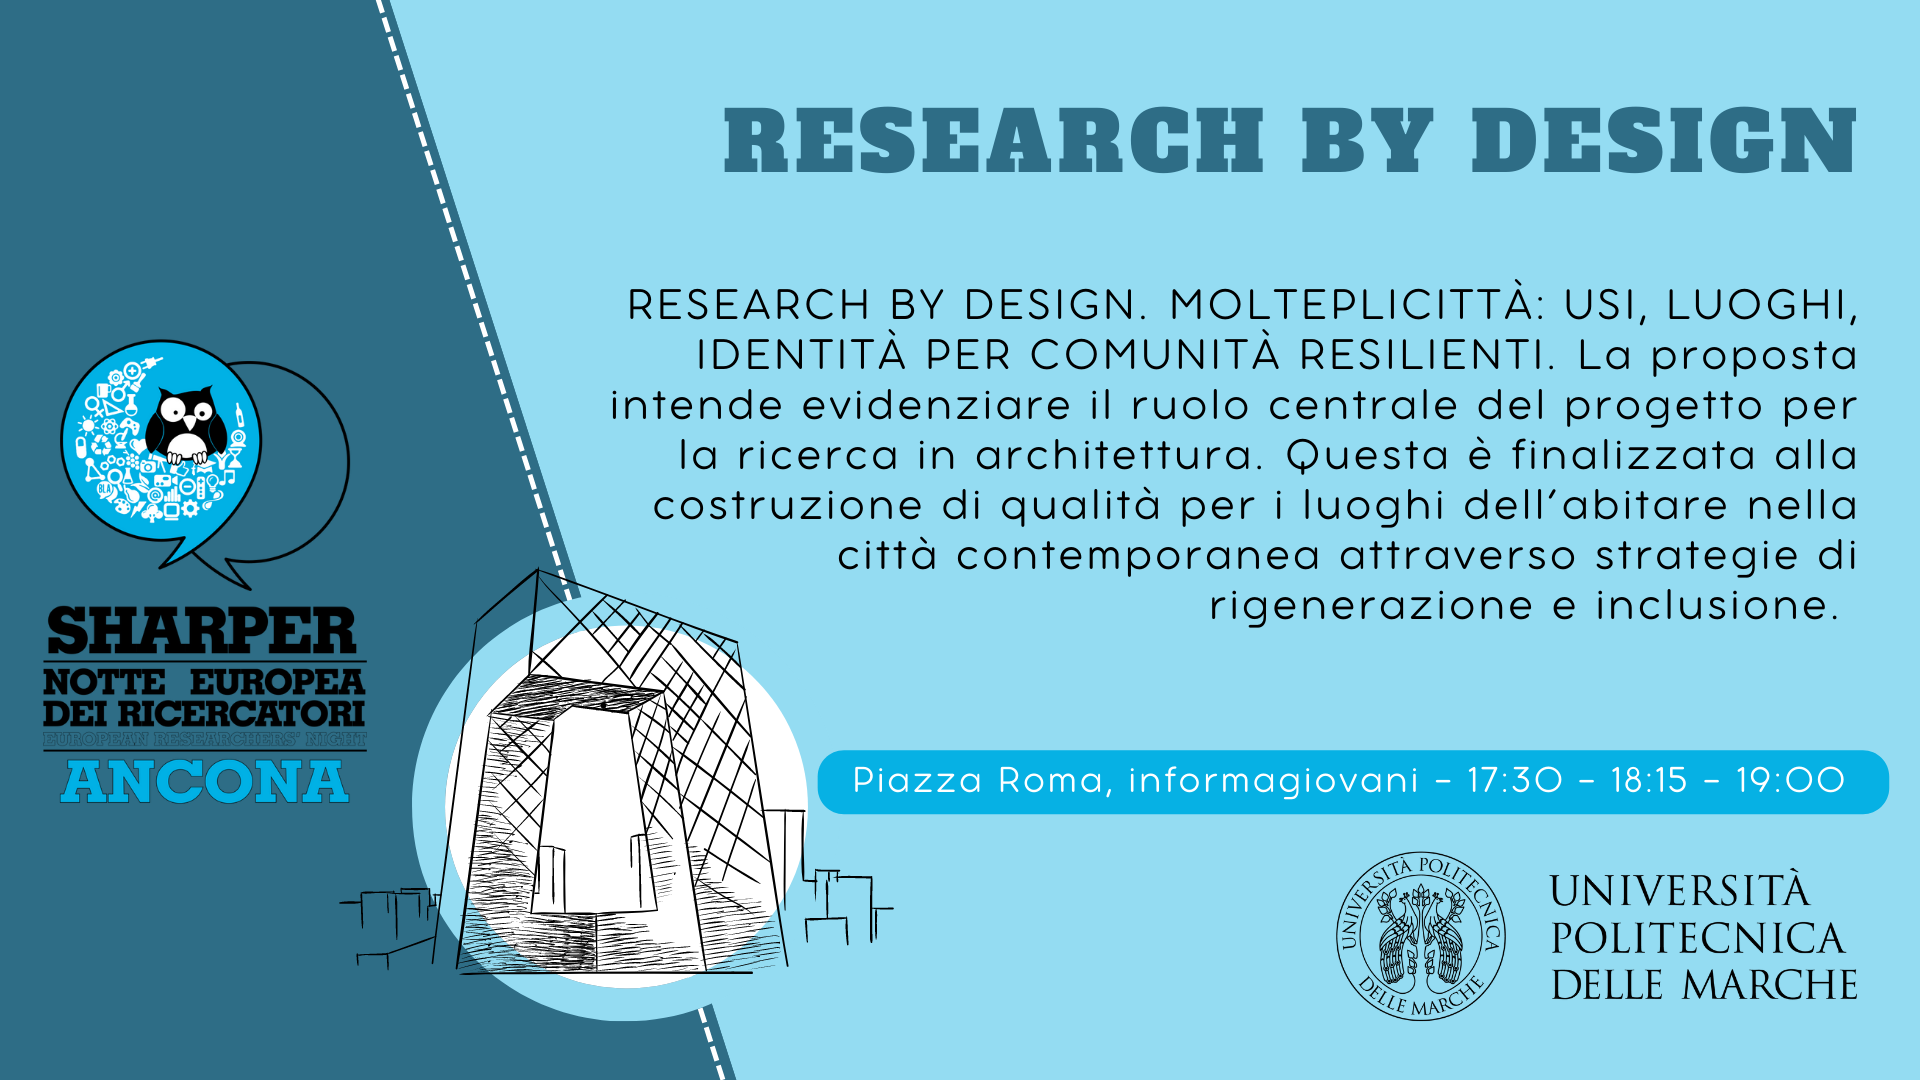 RESEARCH BY DESIGN